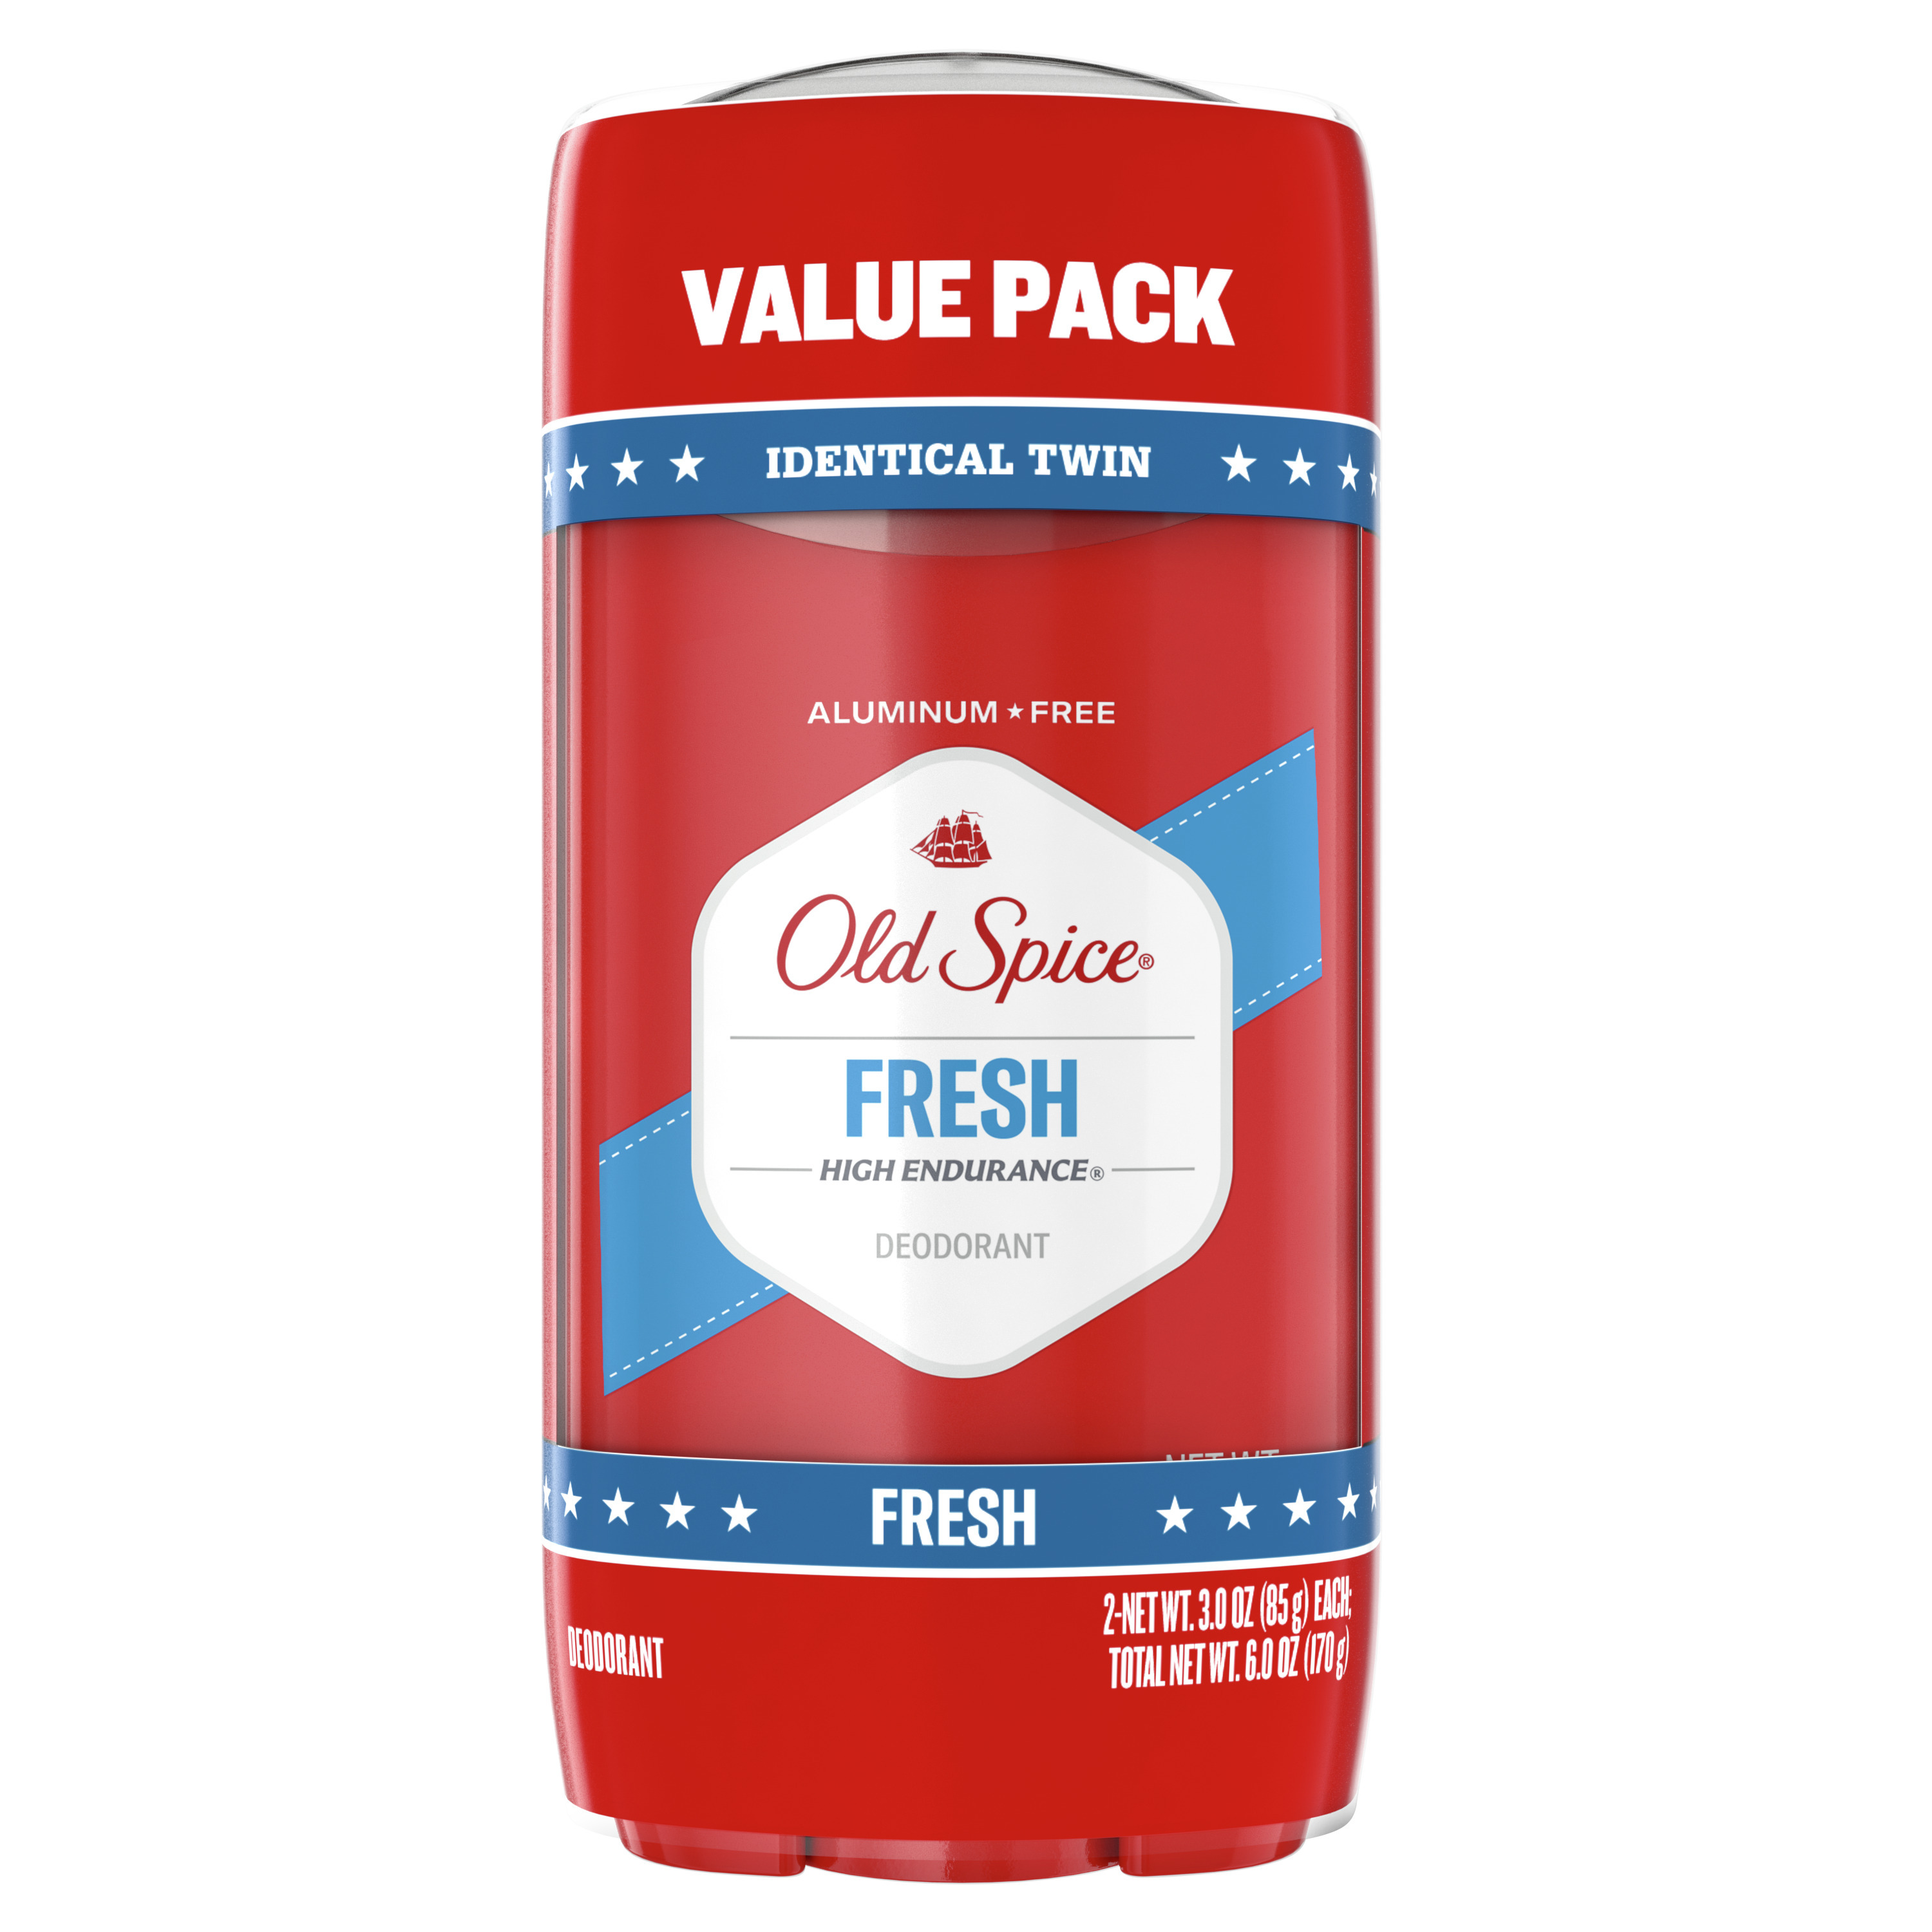 Old Spice High Endurance Deodorant for Men, Aluminum Free, Fresh Scent, 3.0 oz, 2 Pack - image 1 of 6